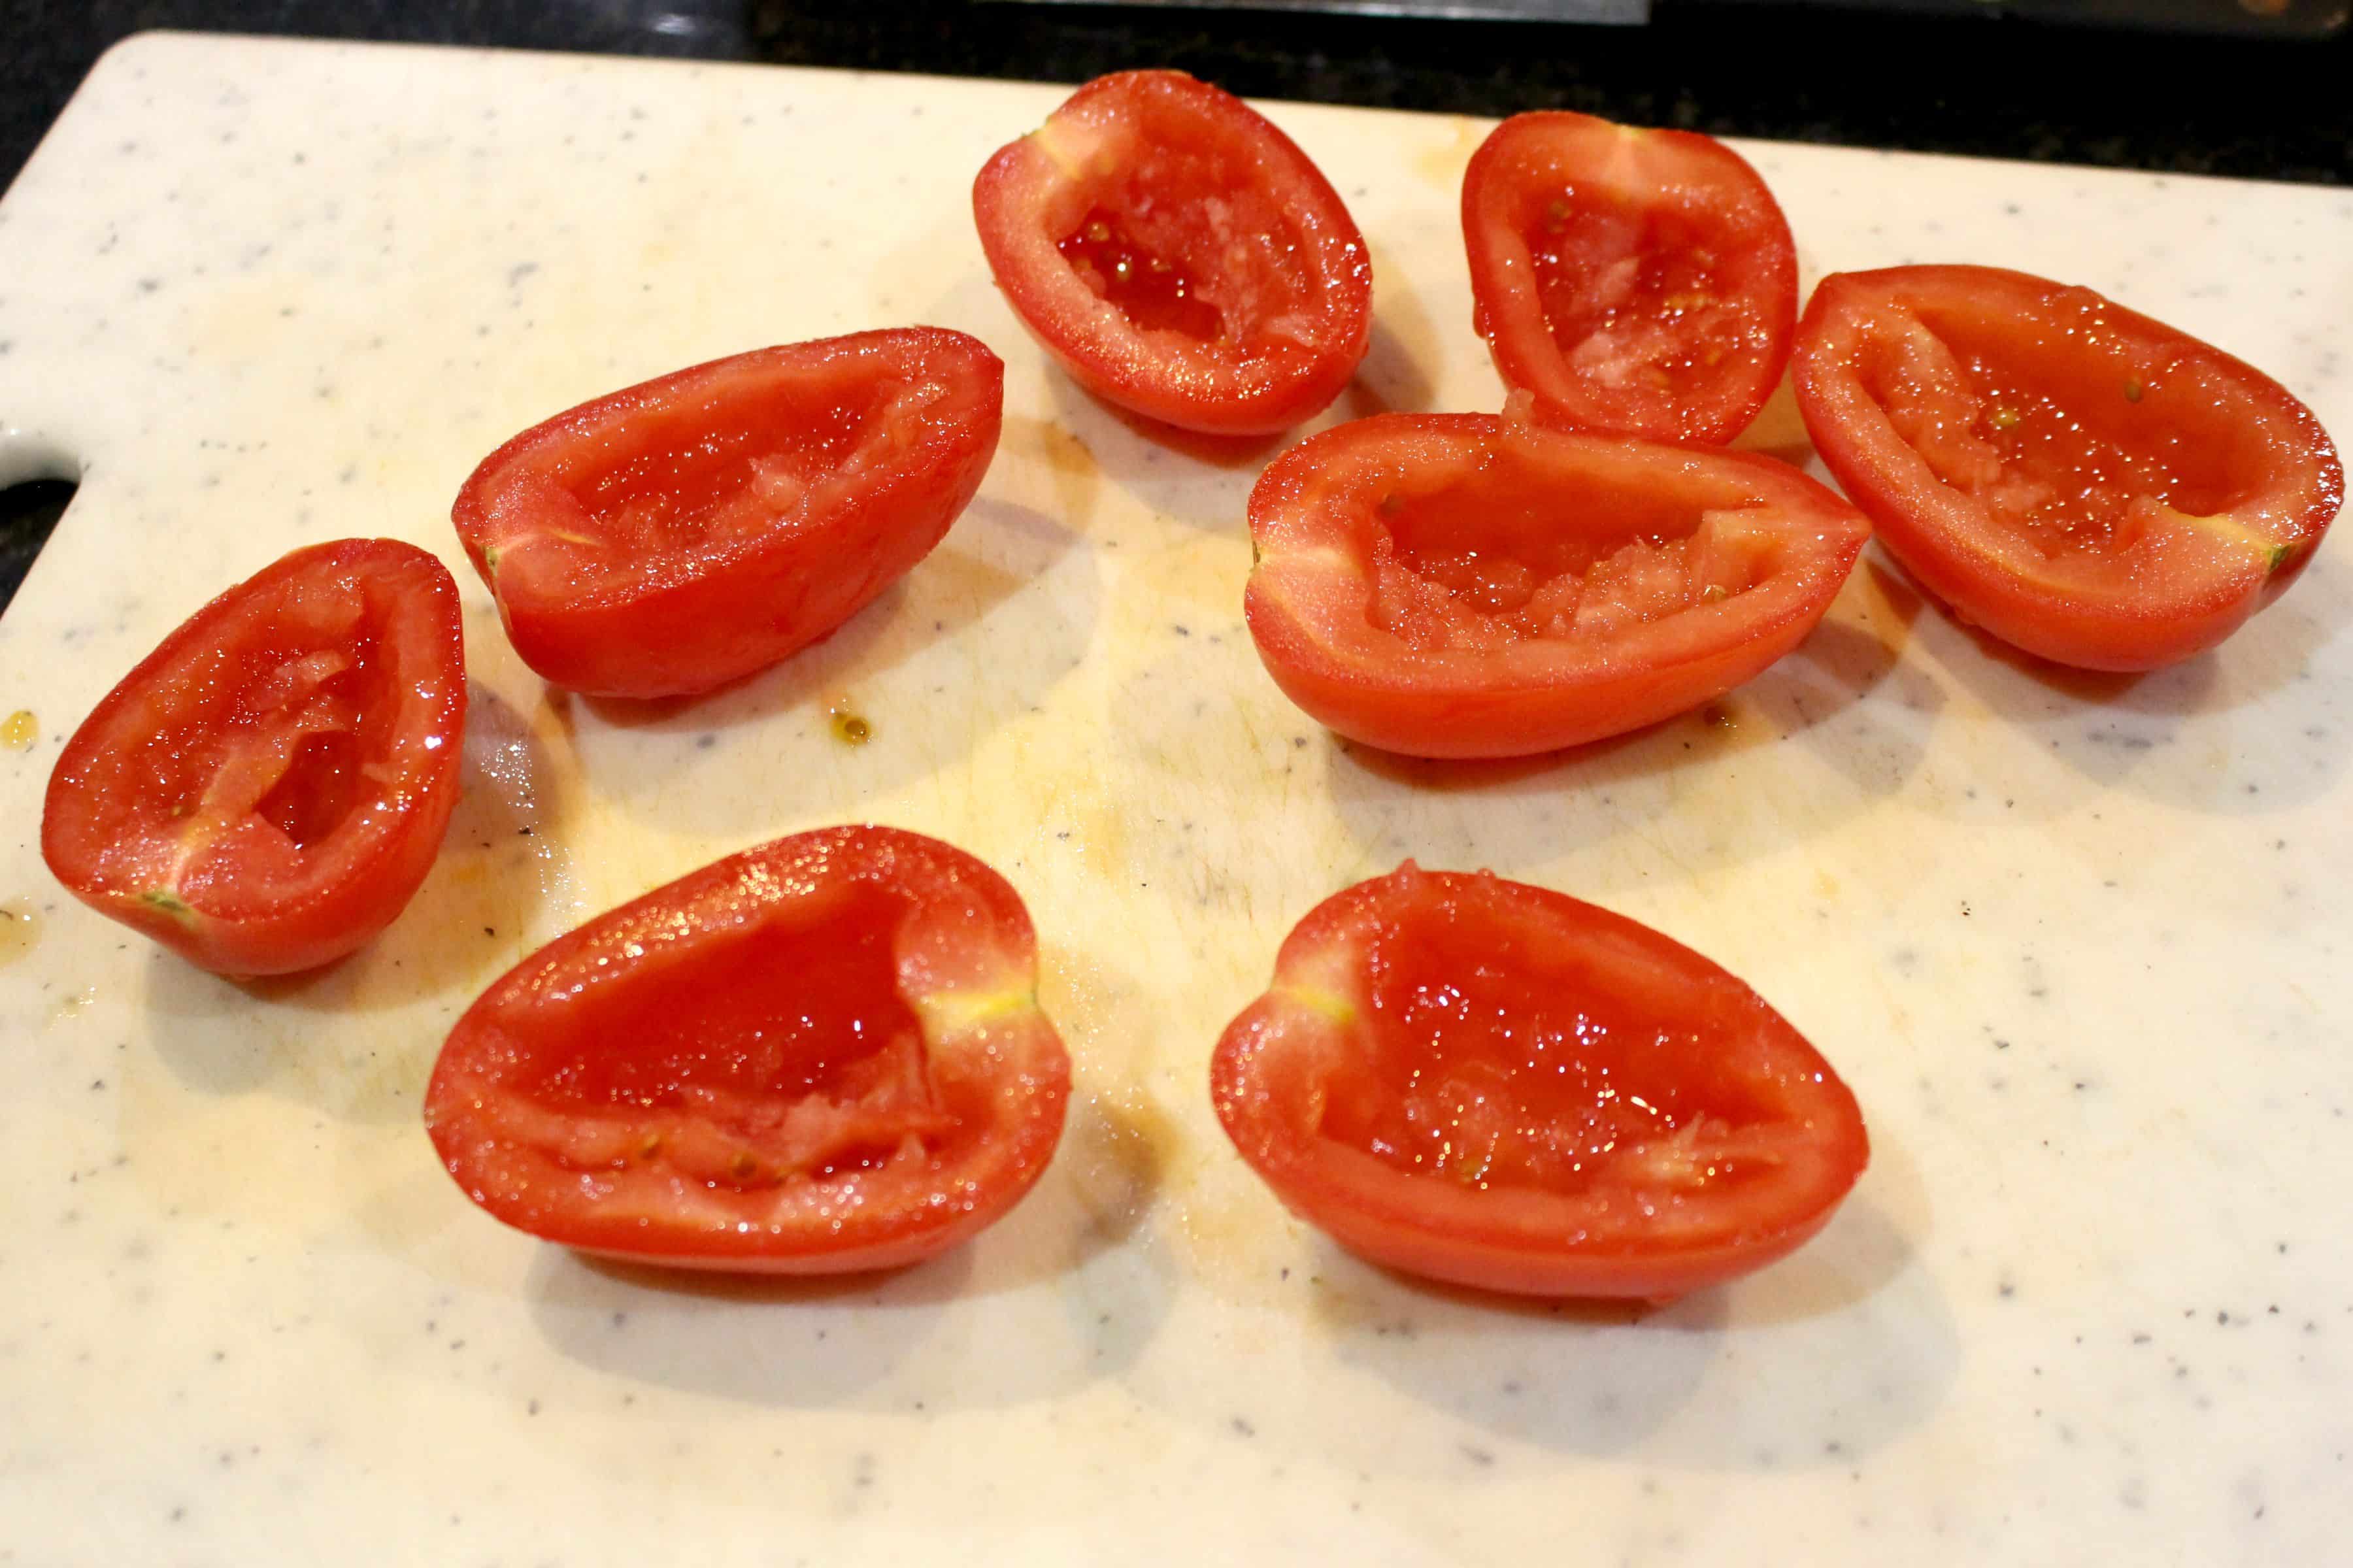 Seedless tomatoes cut into half.